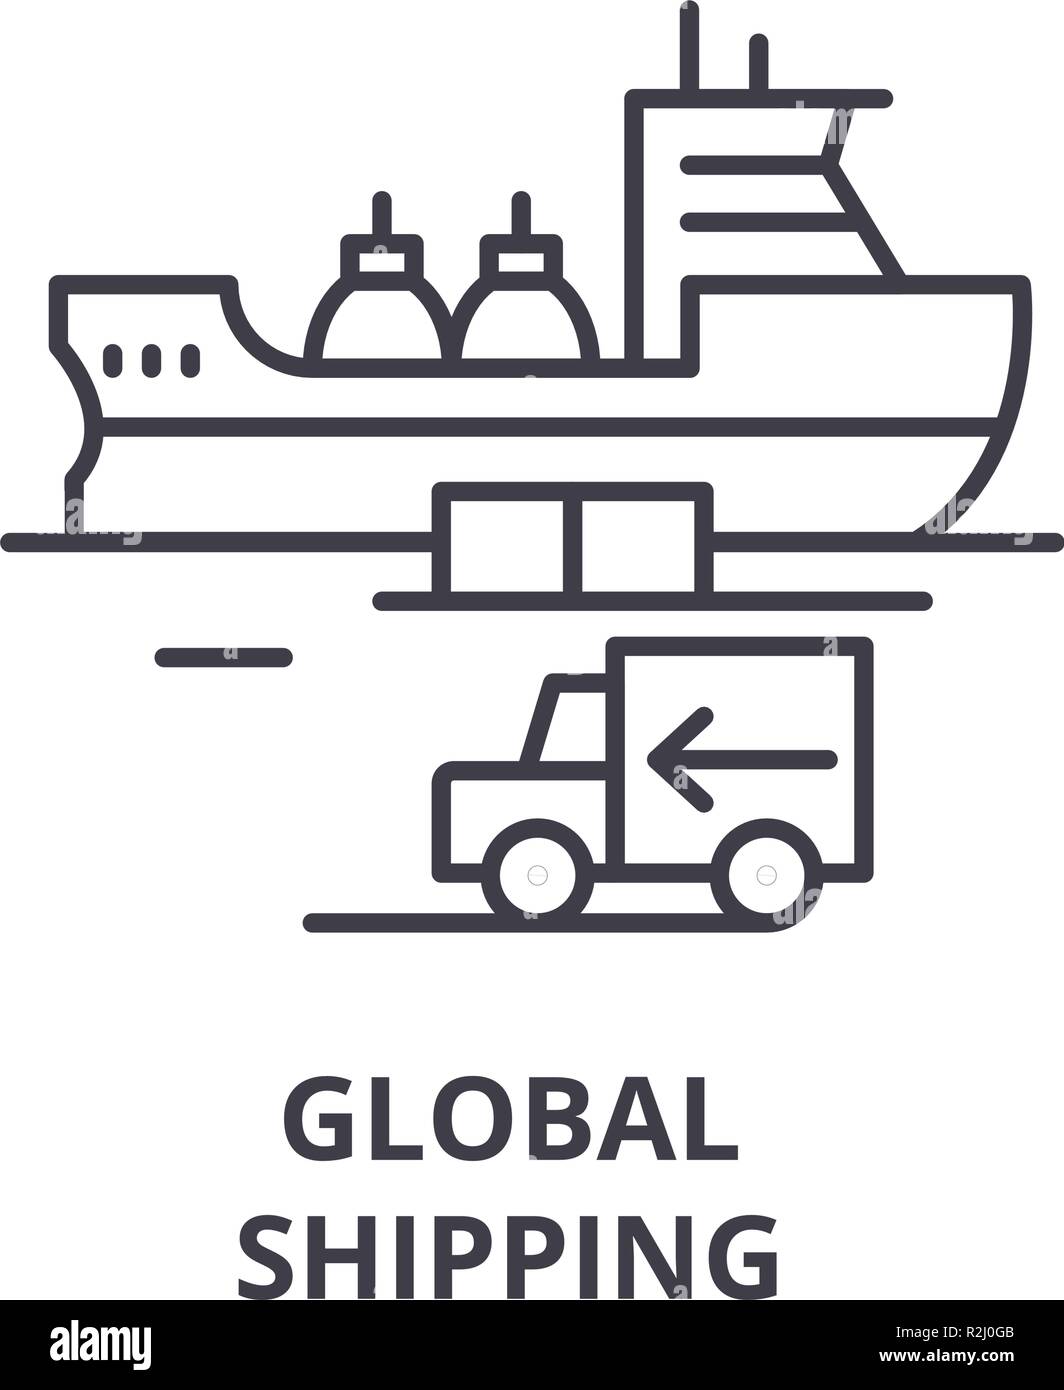 Global shipping line icon concept. Global shipping vector linear illustration, symbol, sign Stock Vector